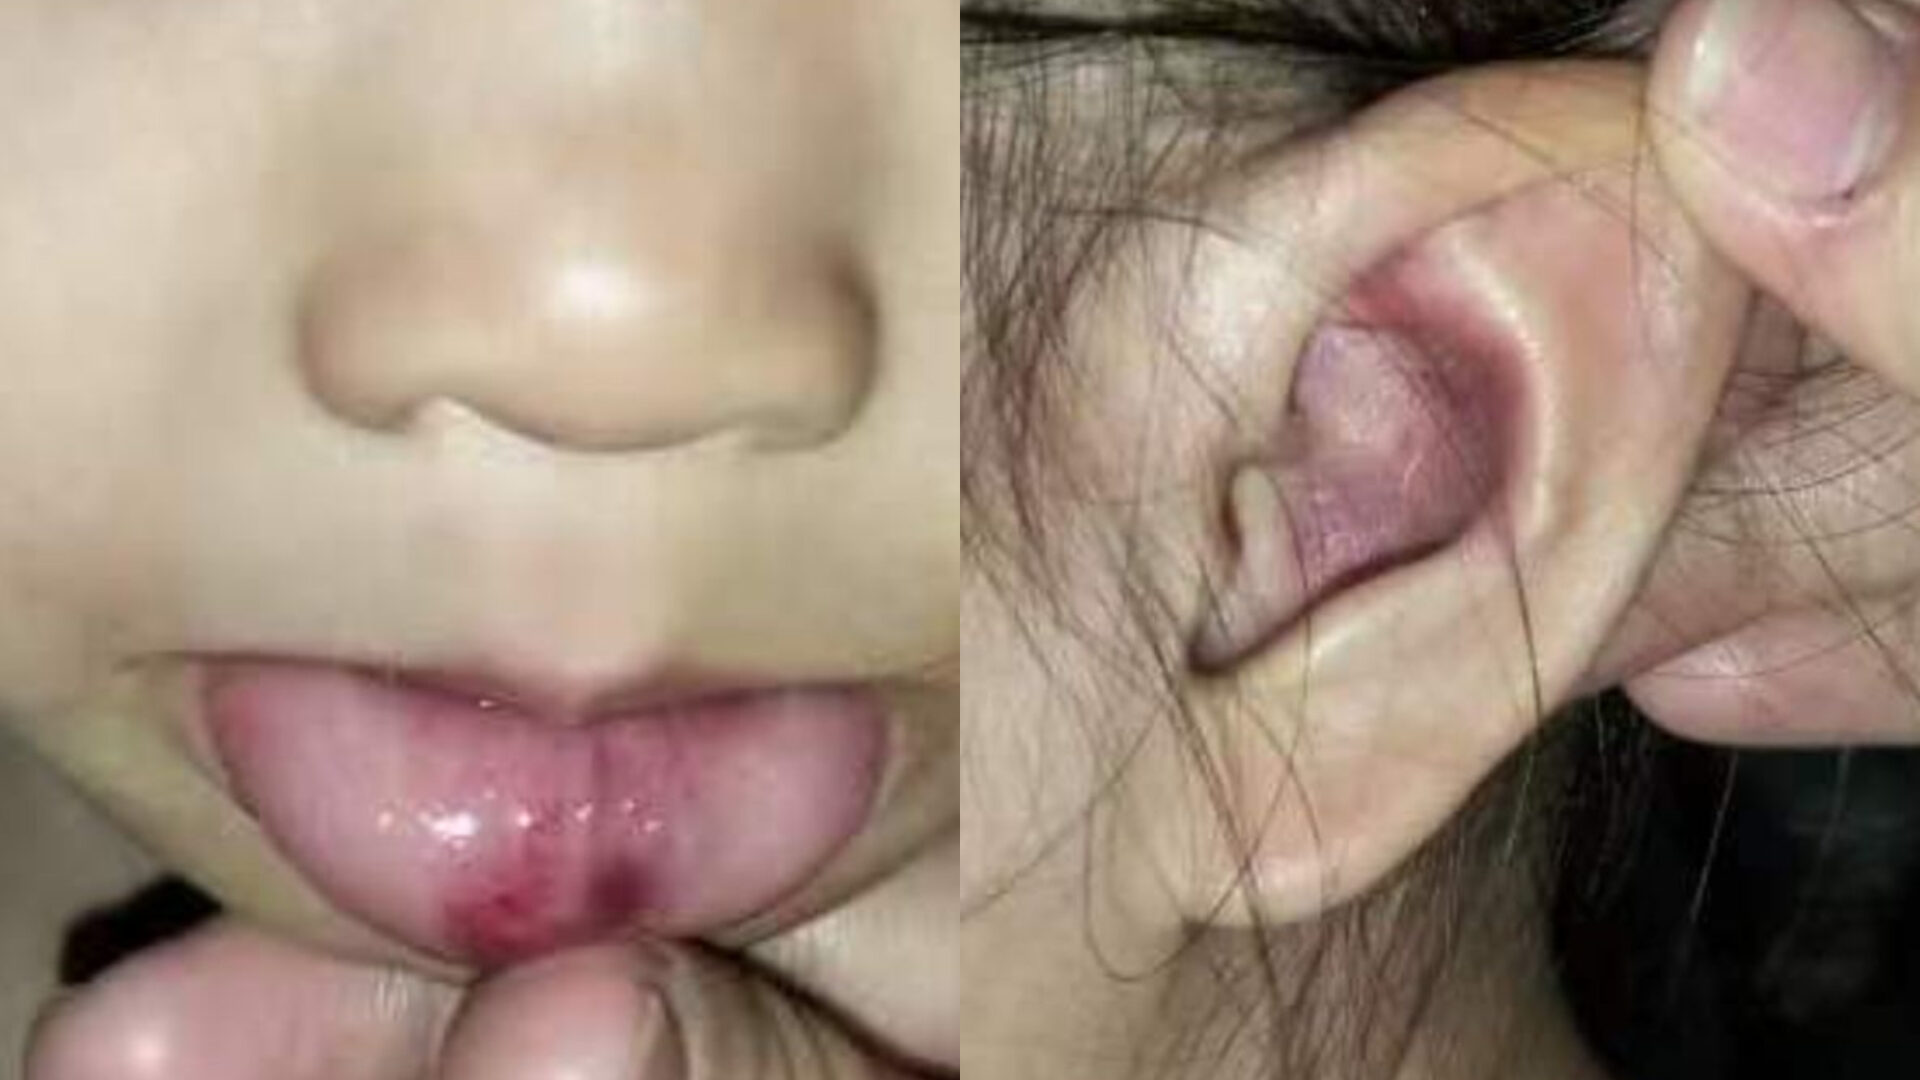 2-year-old's eardrums, lips injured after slapped by mother's boyfriend